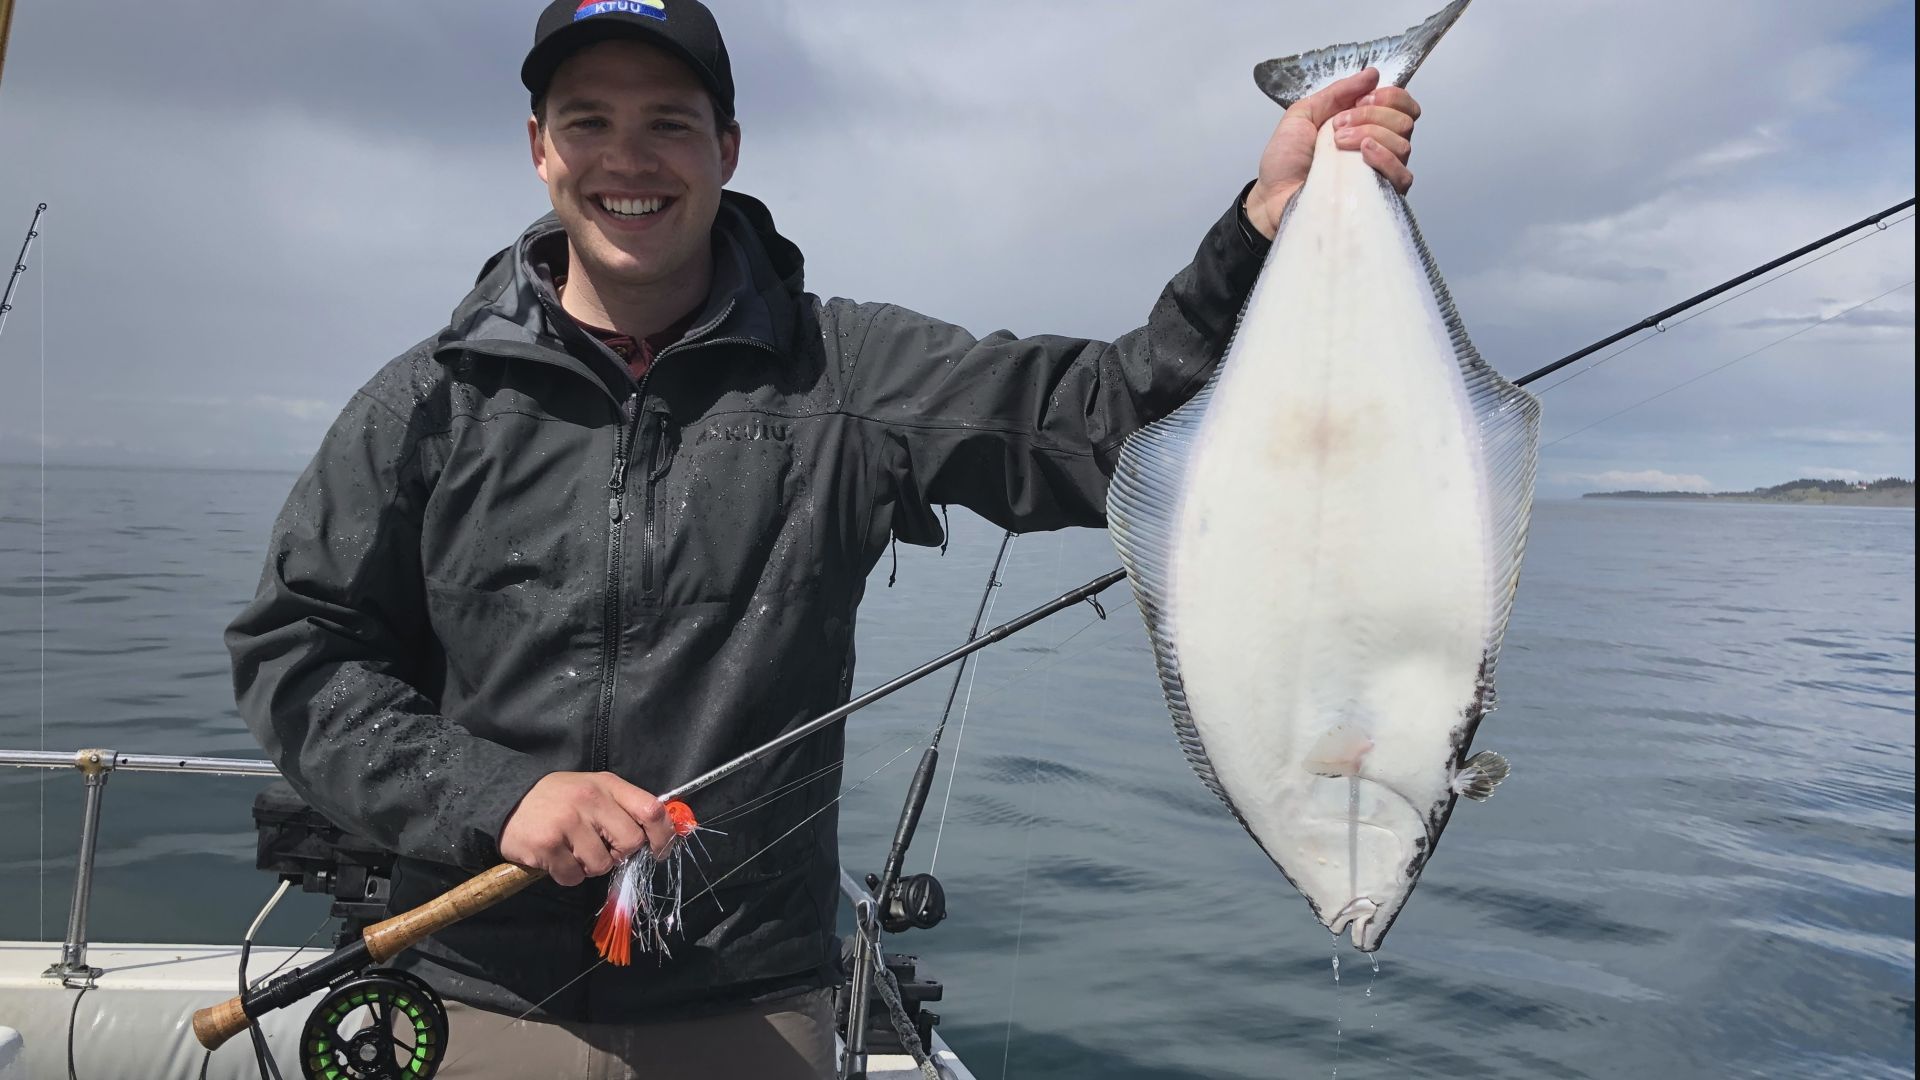 The Fishing Report: Fly Fishing for Halibut